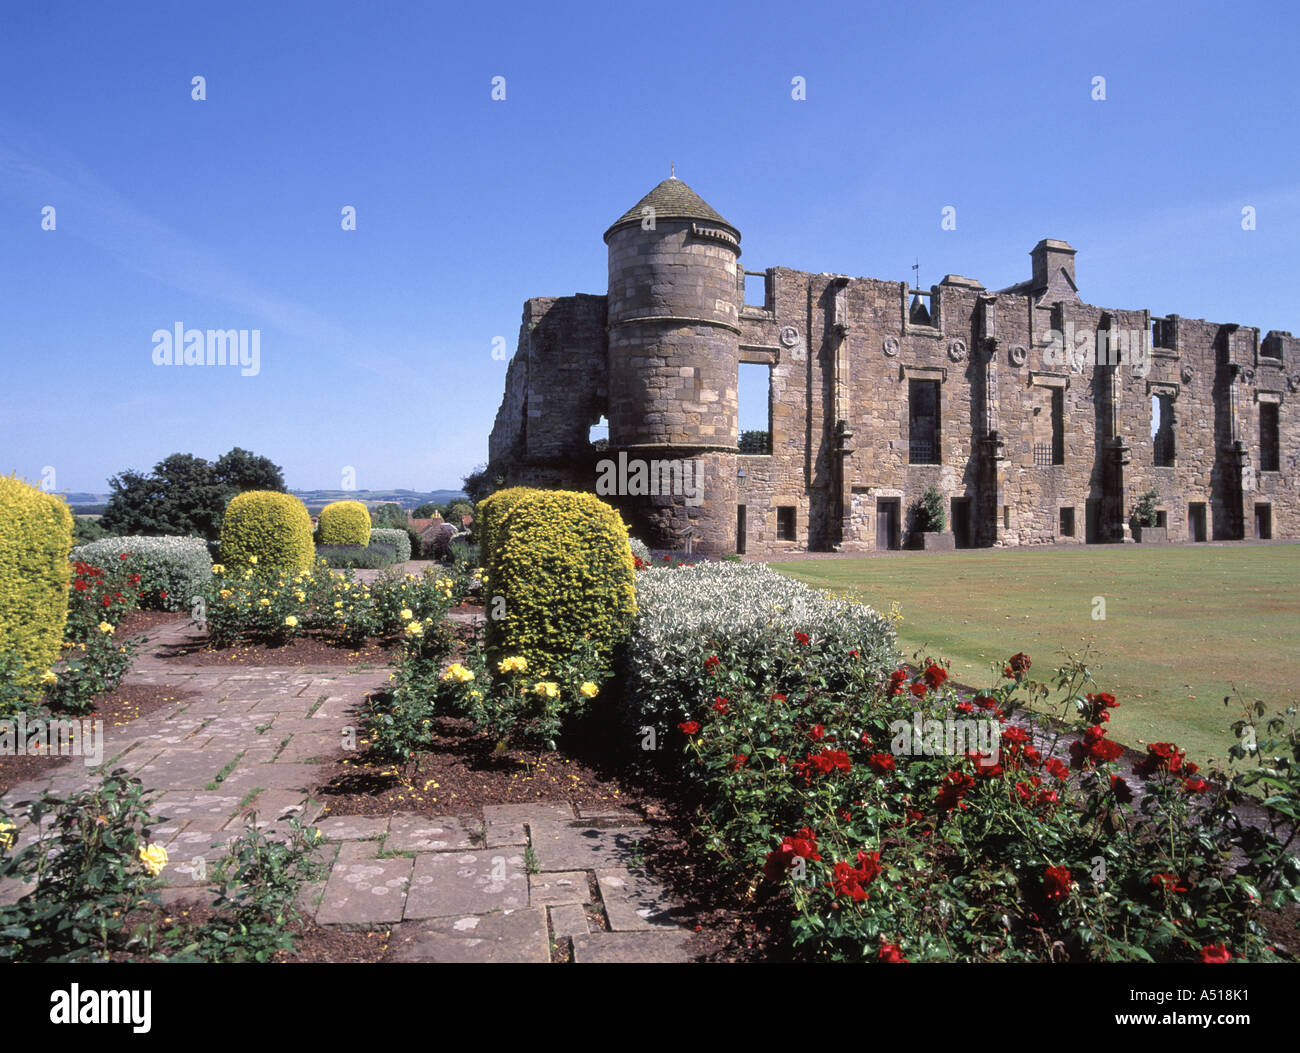 Roses in bloom in gardens at ruins of Blackness Castle Scheduled Ancient Monument in care of Historic Scotland with Firth of Forth distant Falkirk UK Stock Photo